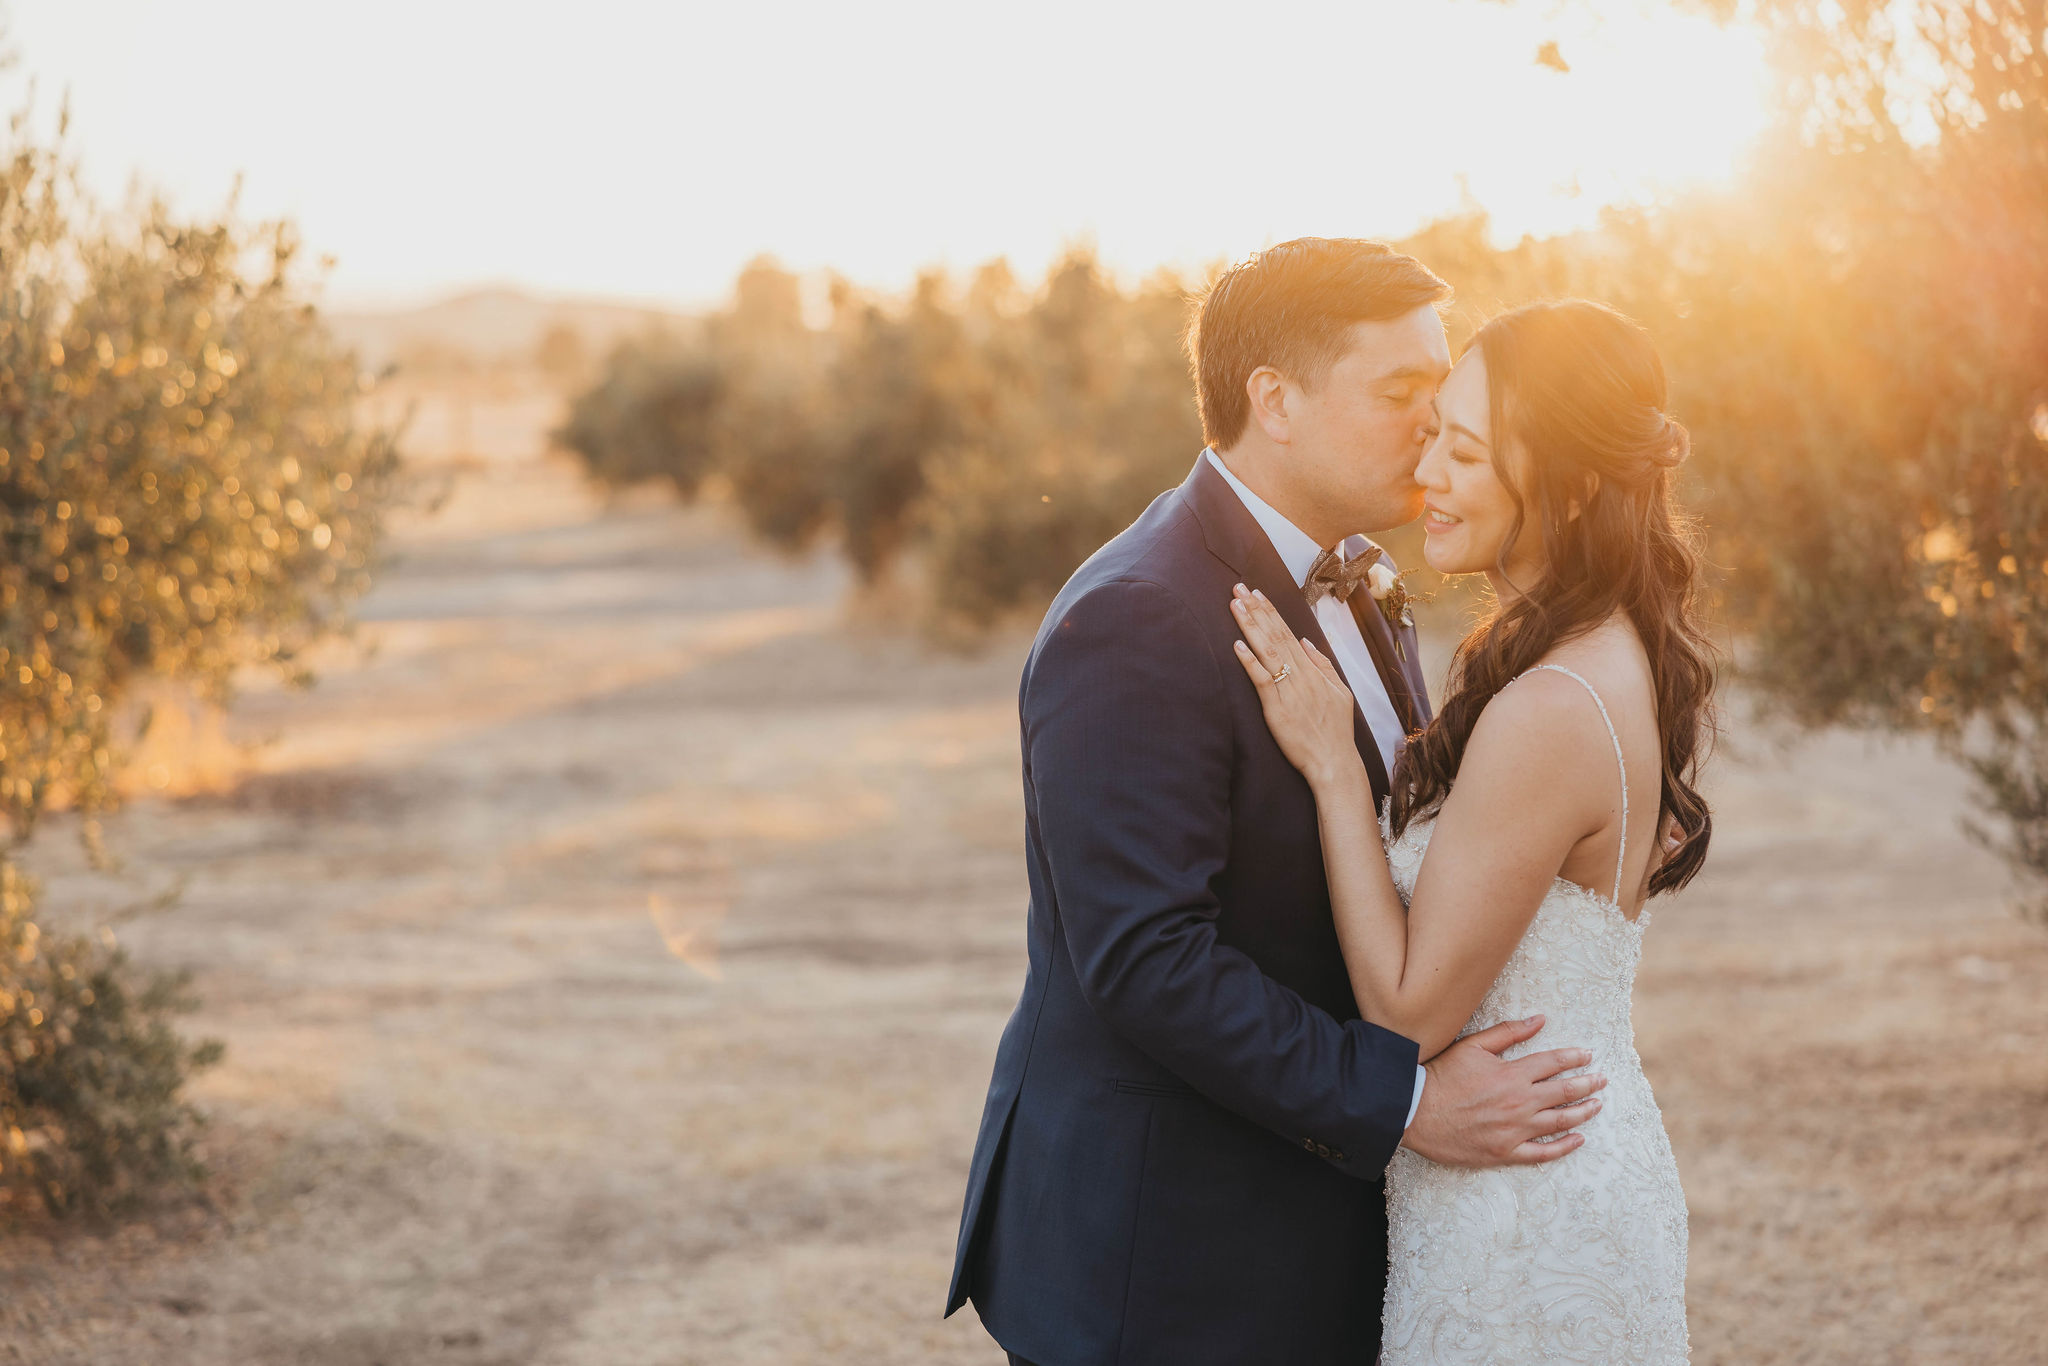 Golden hour wedding portraits at The Purple Orchid Resort and Spa in Livermore California